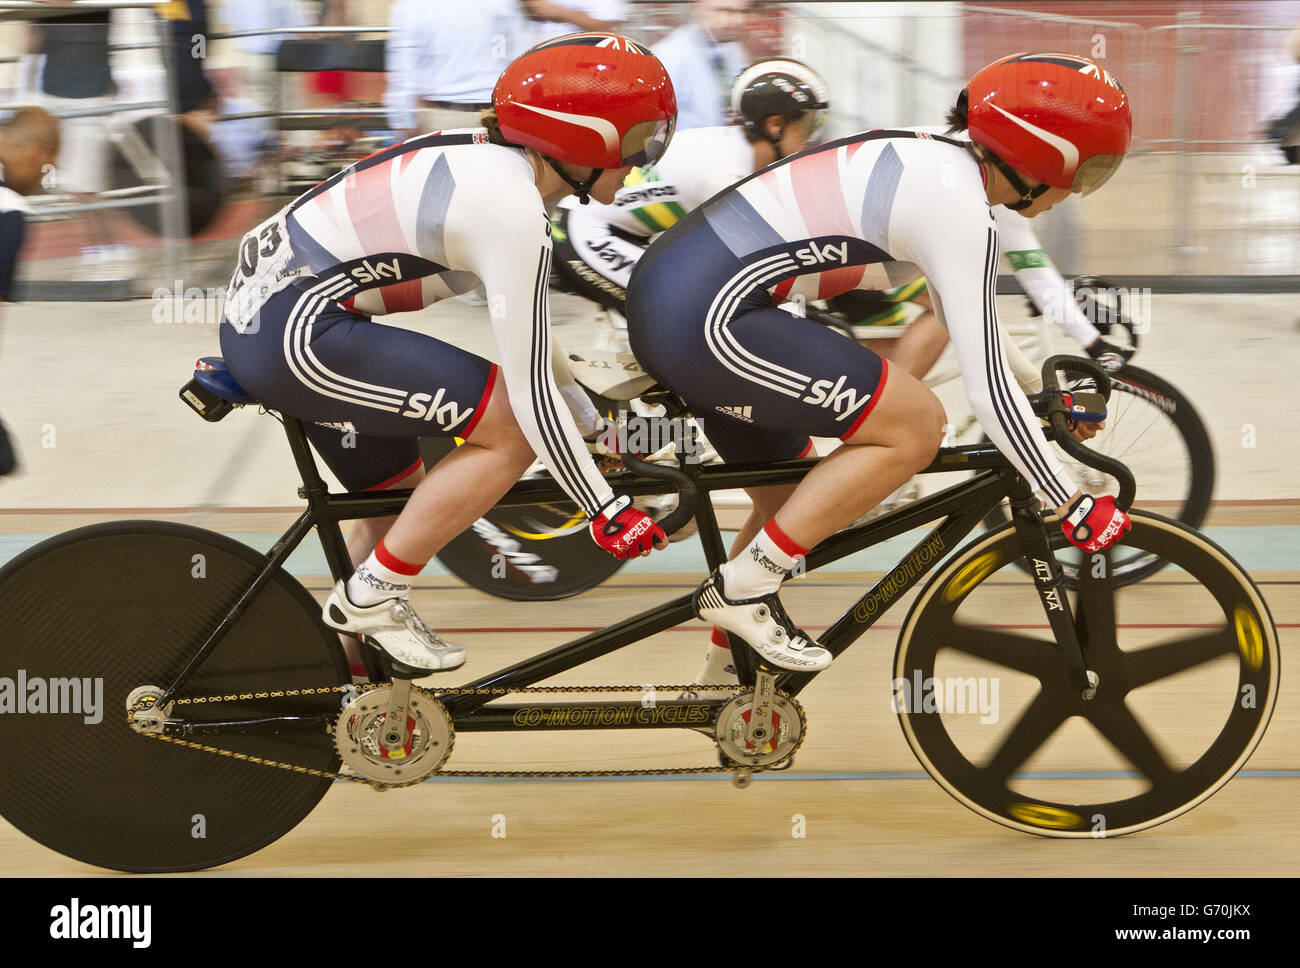 Great Britain's Sophie Thornhill and Rachel James compete against USA's Karissa Whitsel and Jennifer Triplett during day four of the UCI Para-cycling Track World Championships at the Aguascalientes Bicentenary Velodrome, Aguascalientes, Mexico. Stock Photo